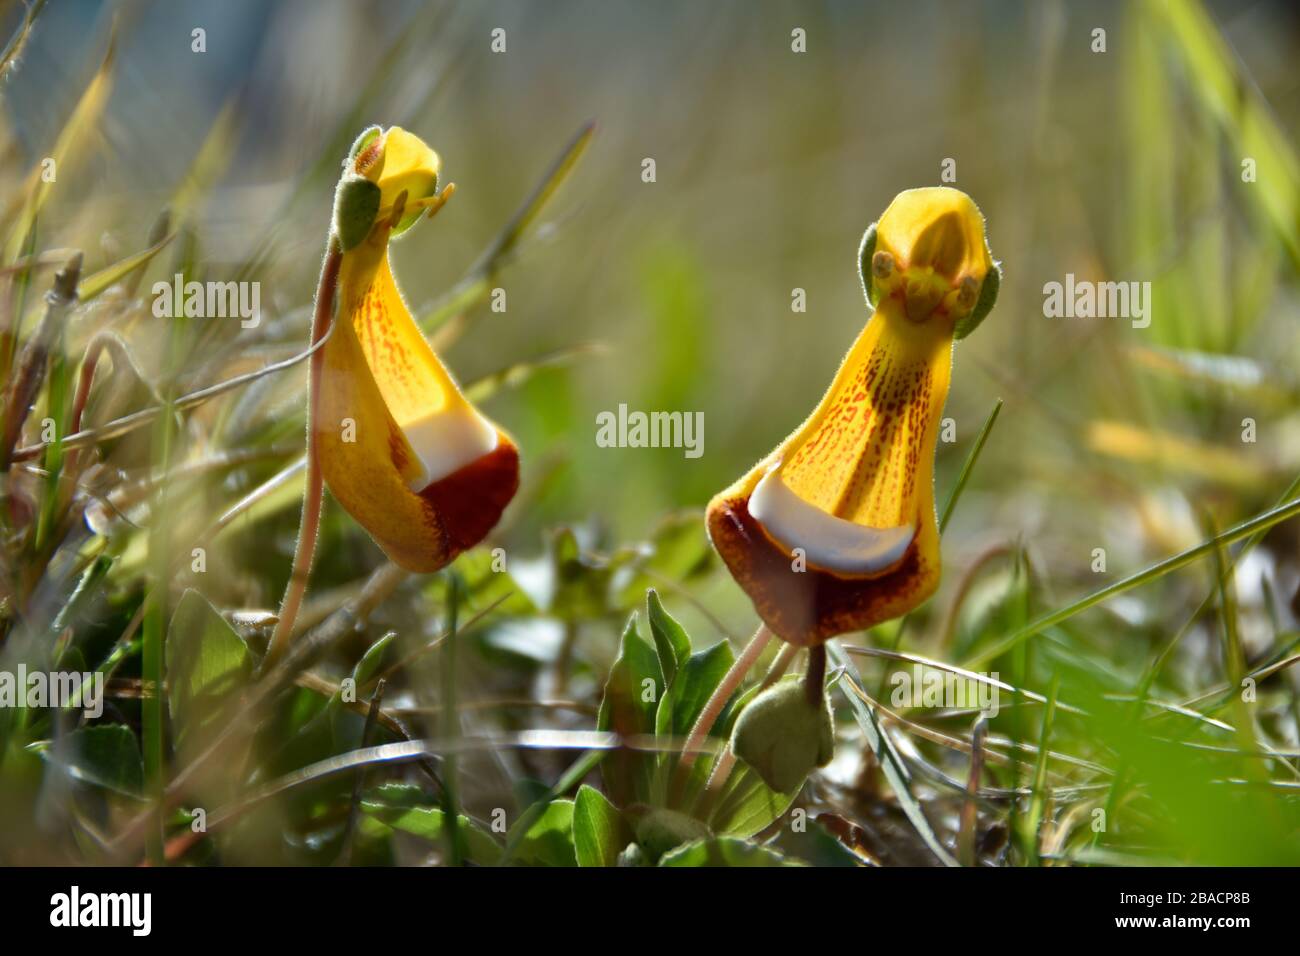 Calceolaria uniflora, or Calceolaria darwinii, called Darwin's slipper, a type of lady's slipper that grows in patagonia, seen at Torres del Paine nat Stock Photo